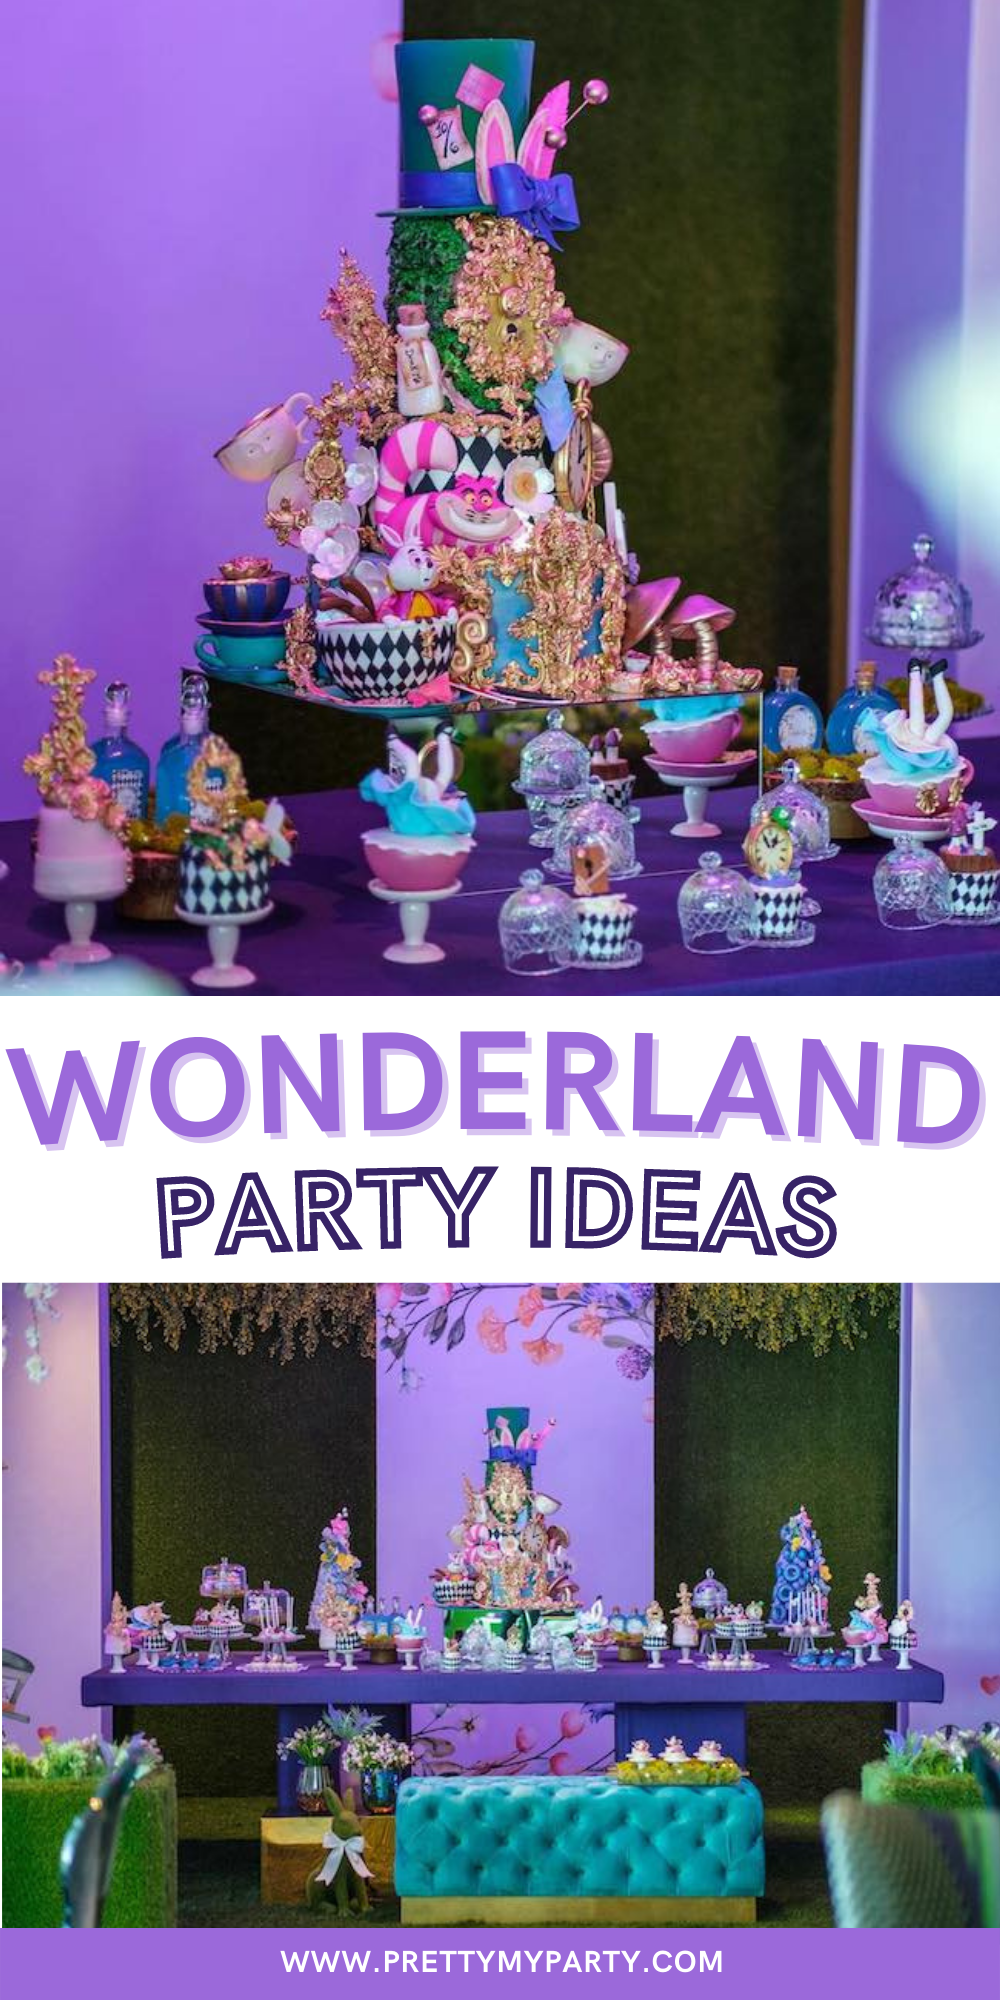 Alice in Wonderland Party Ideas on Pretty My Party